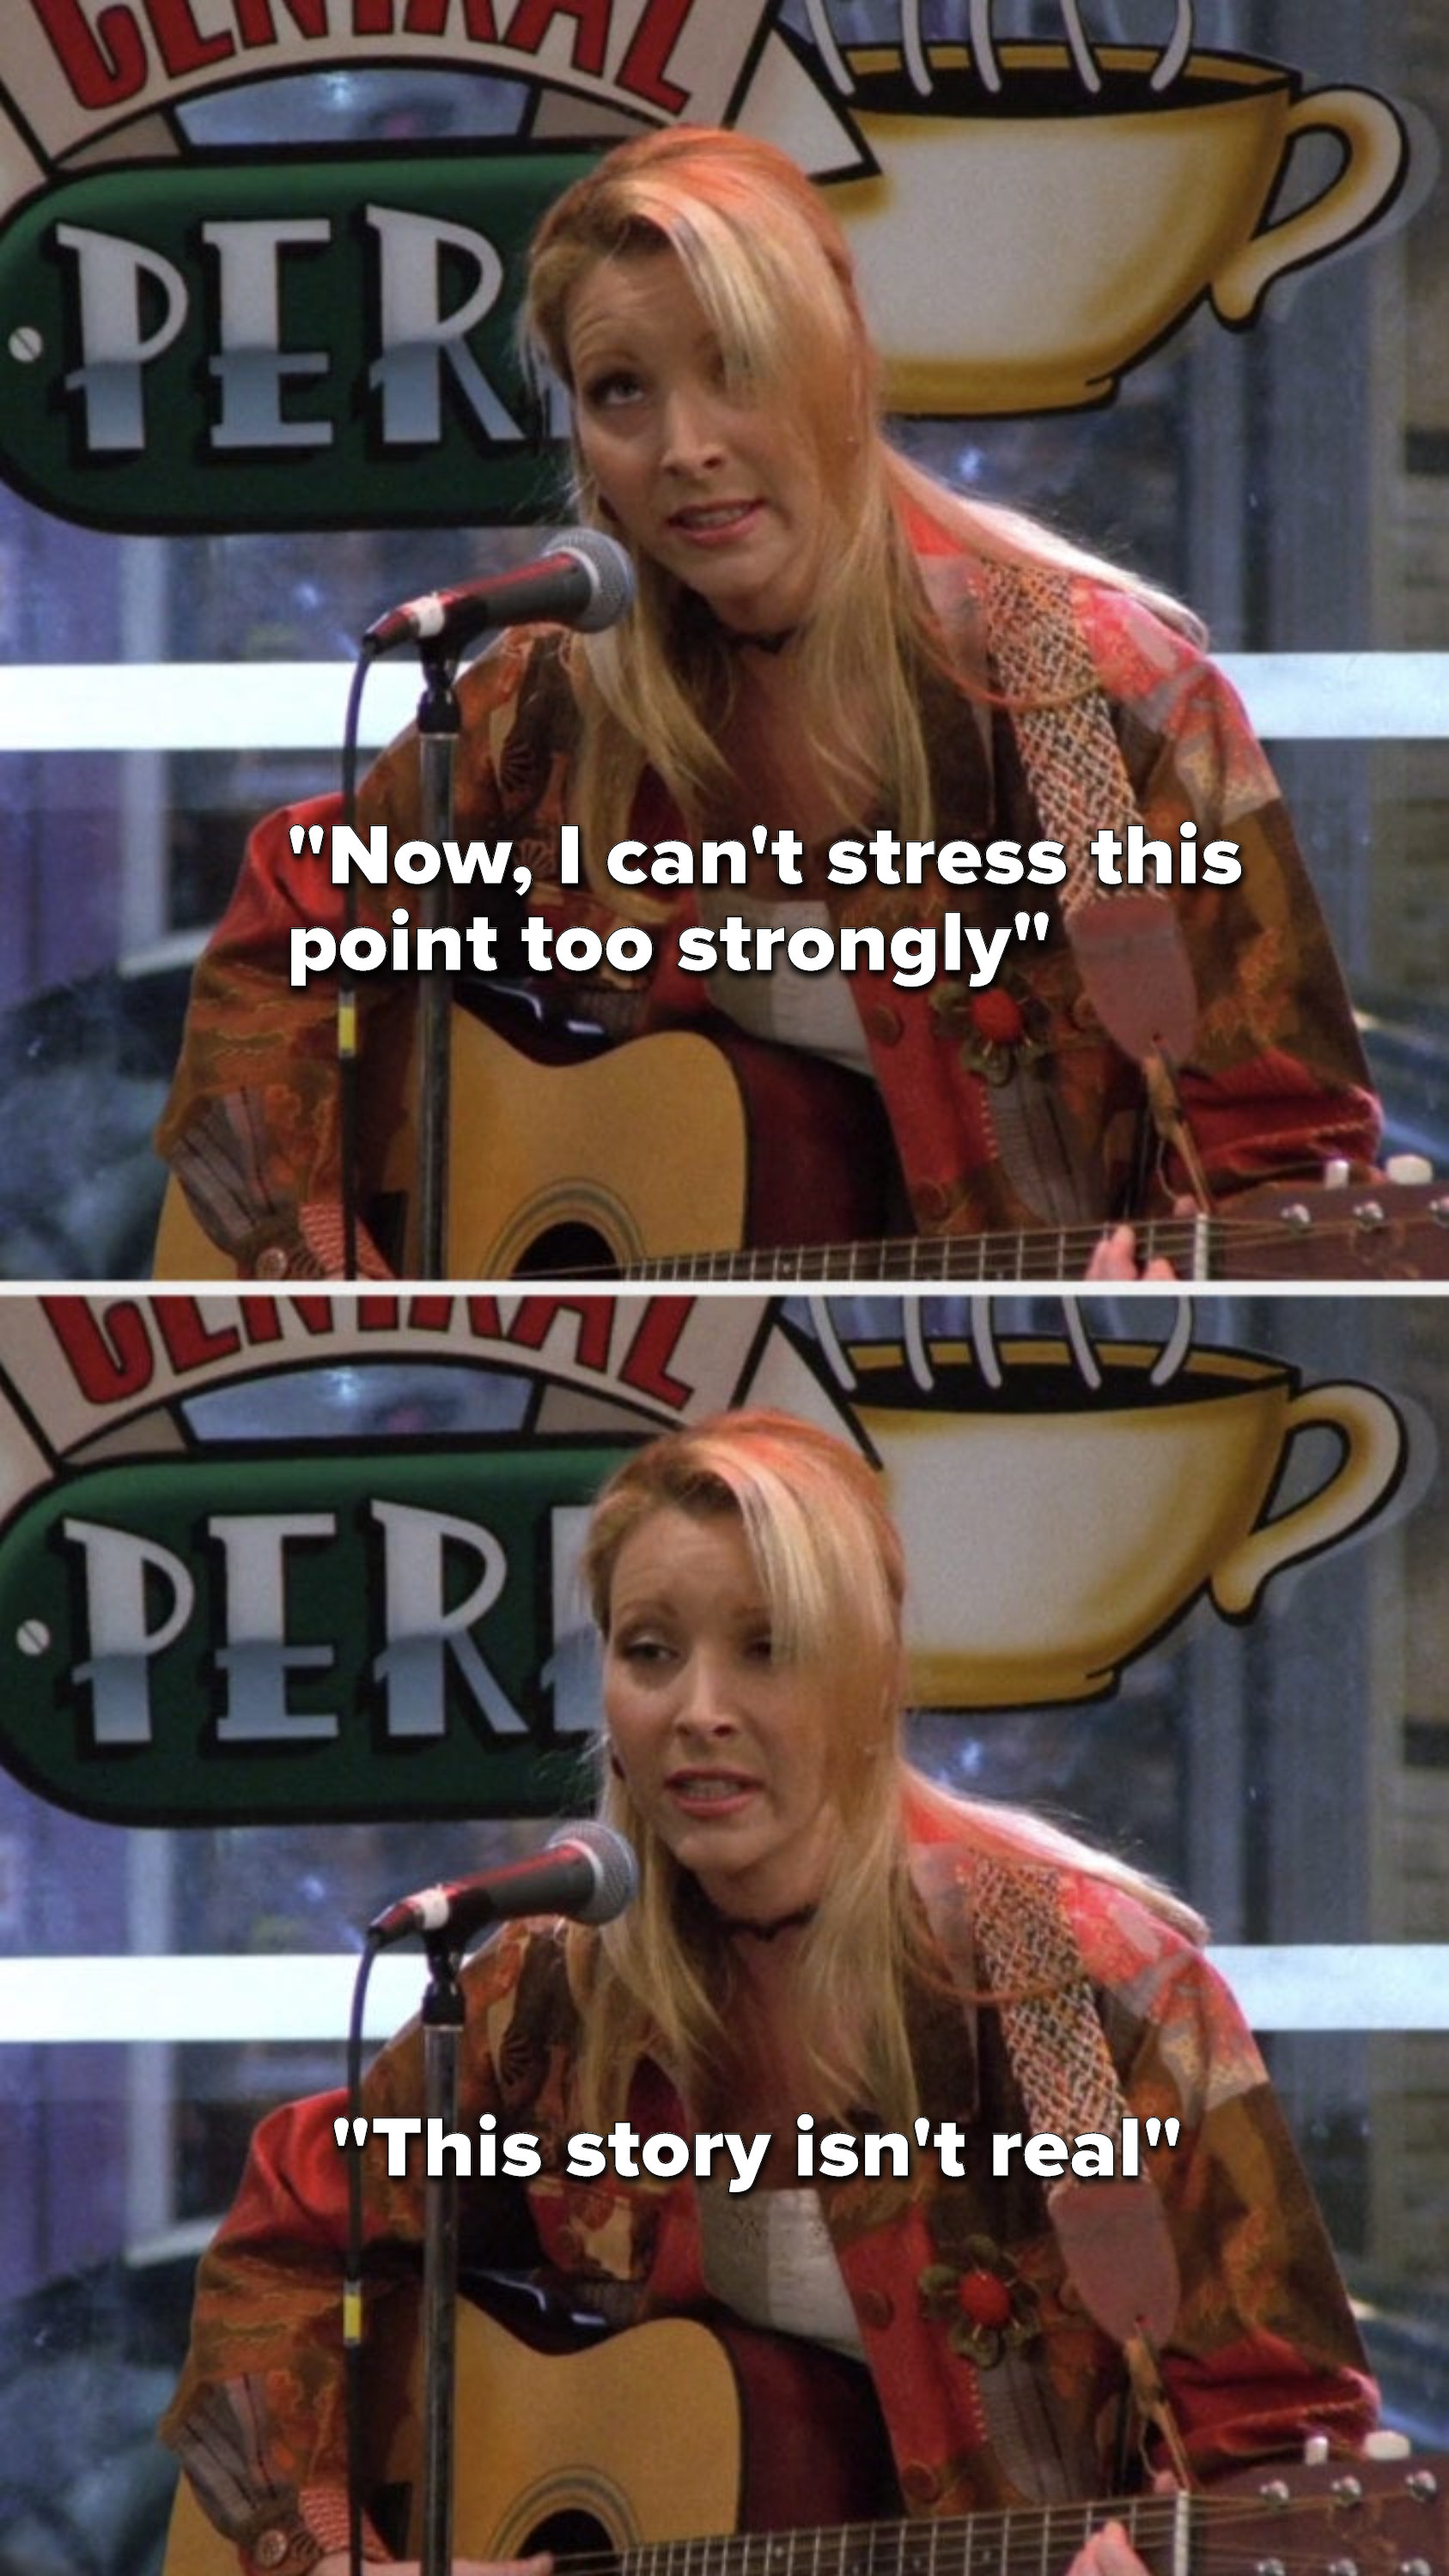 Phoebe sings, &quot;Now, I can&#x27;t stress this point too strongly, this story isn&#x27;t real&quot;